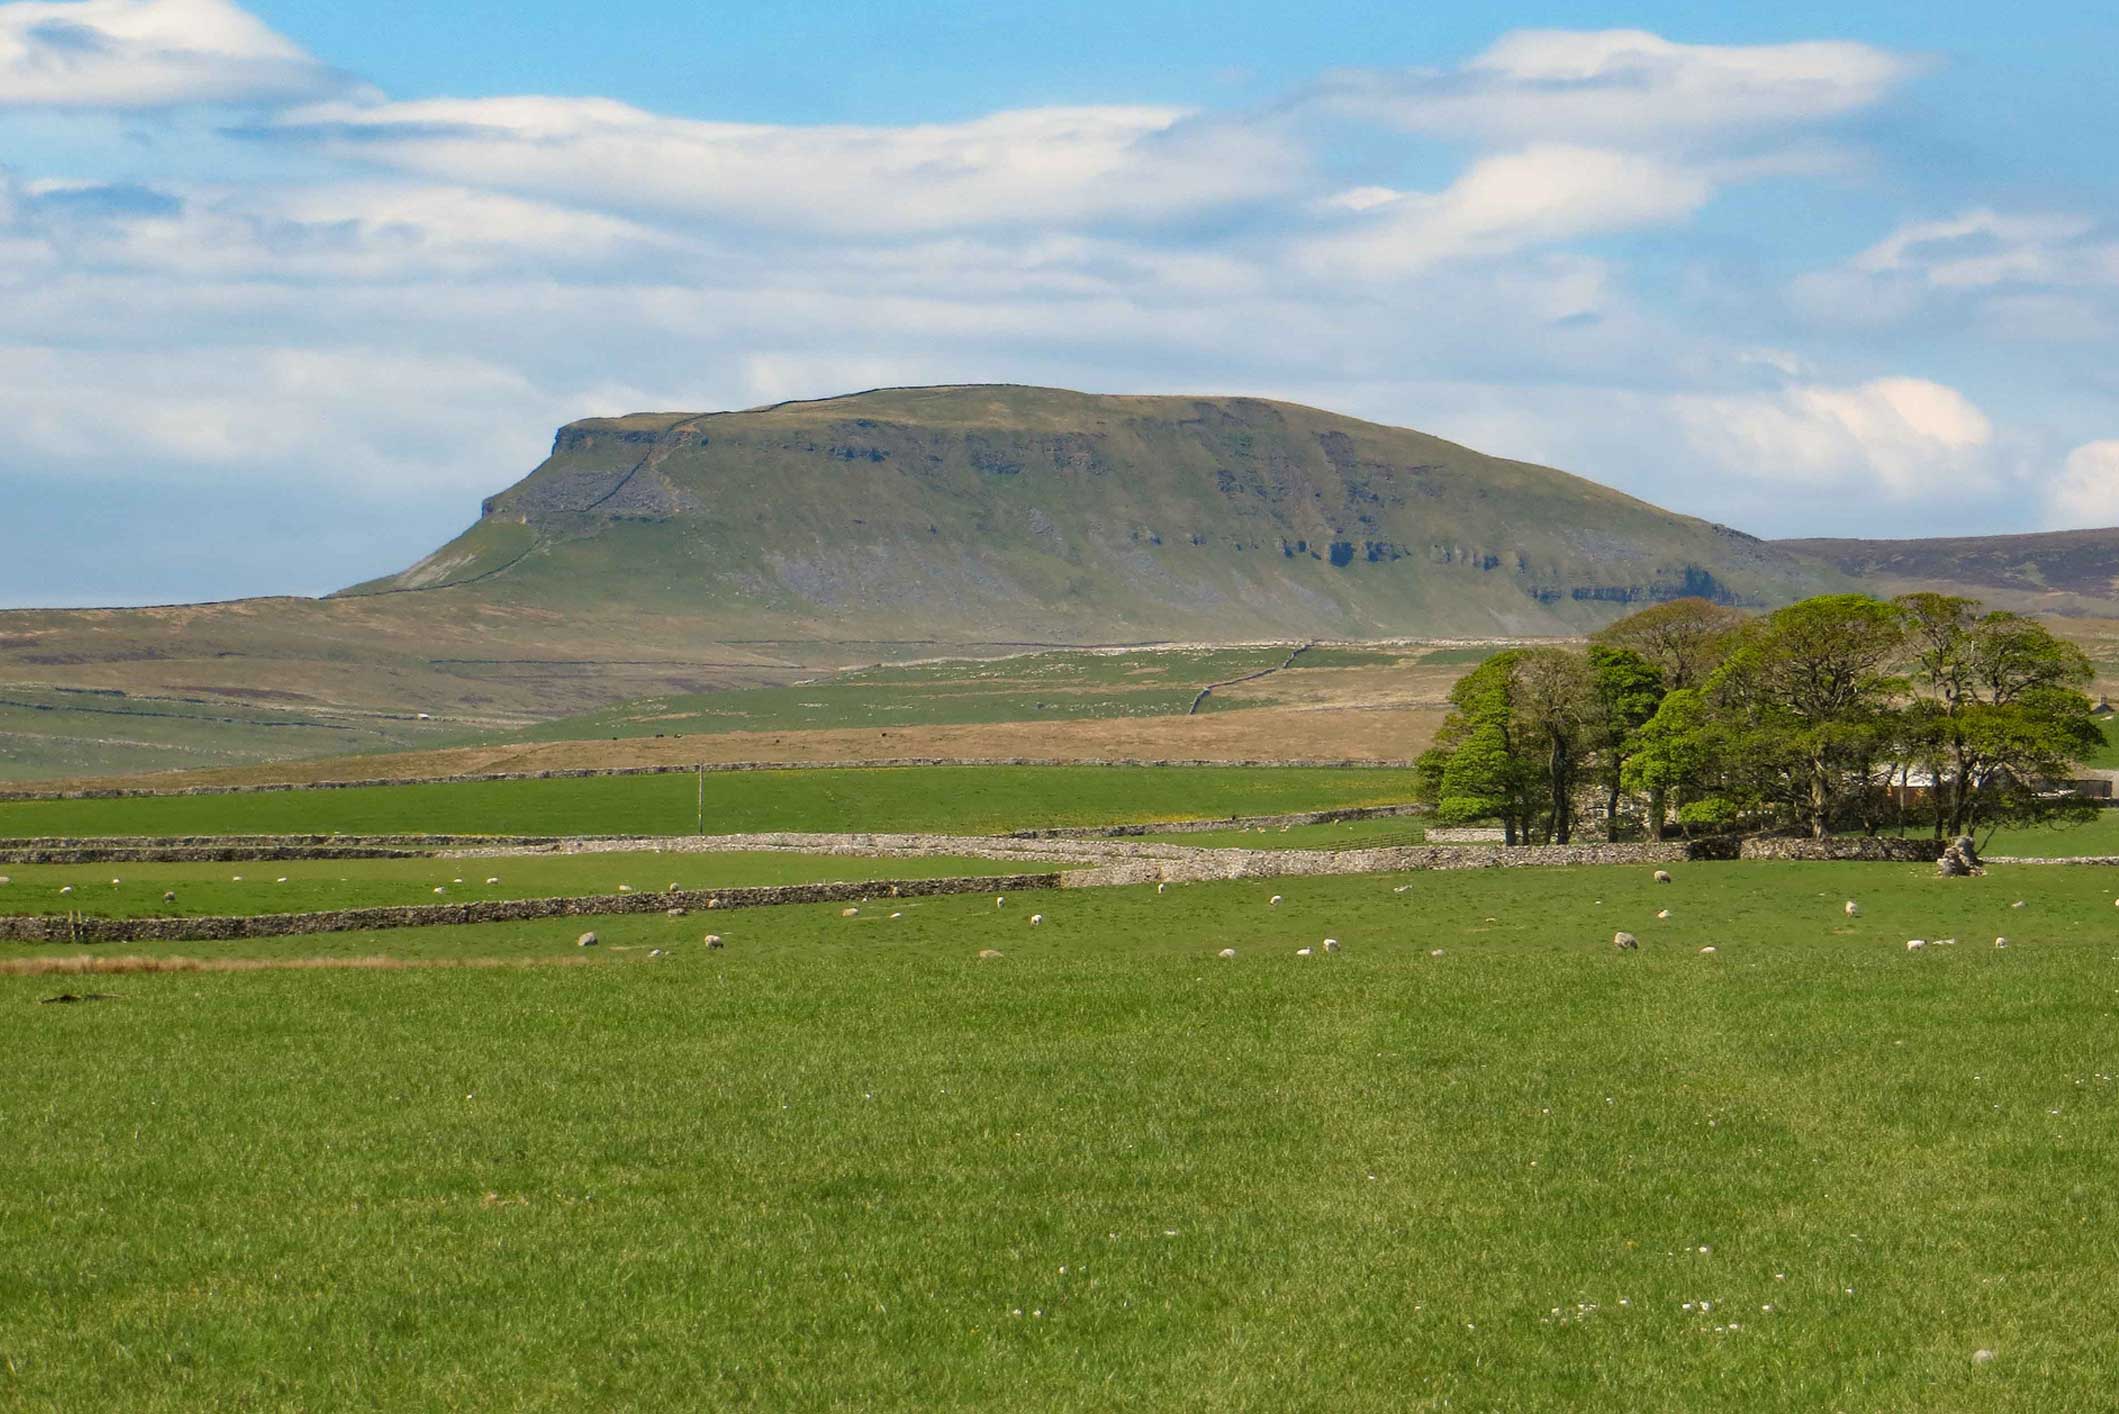 The Pen-y-Ghent mountain of the Yorkshire Three Peaks Challenge